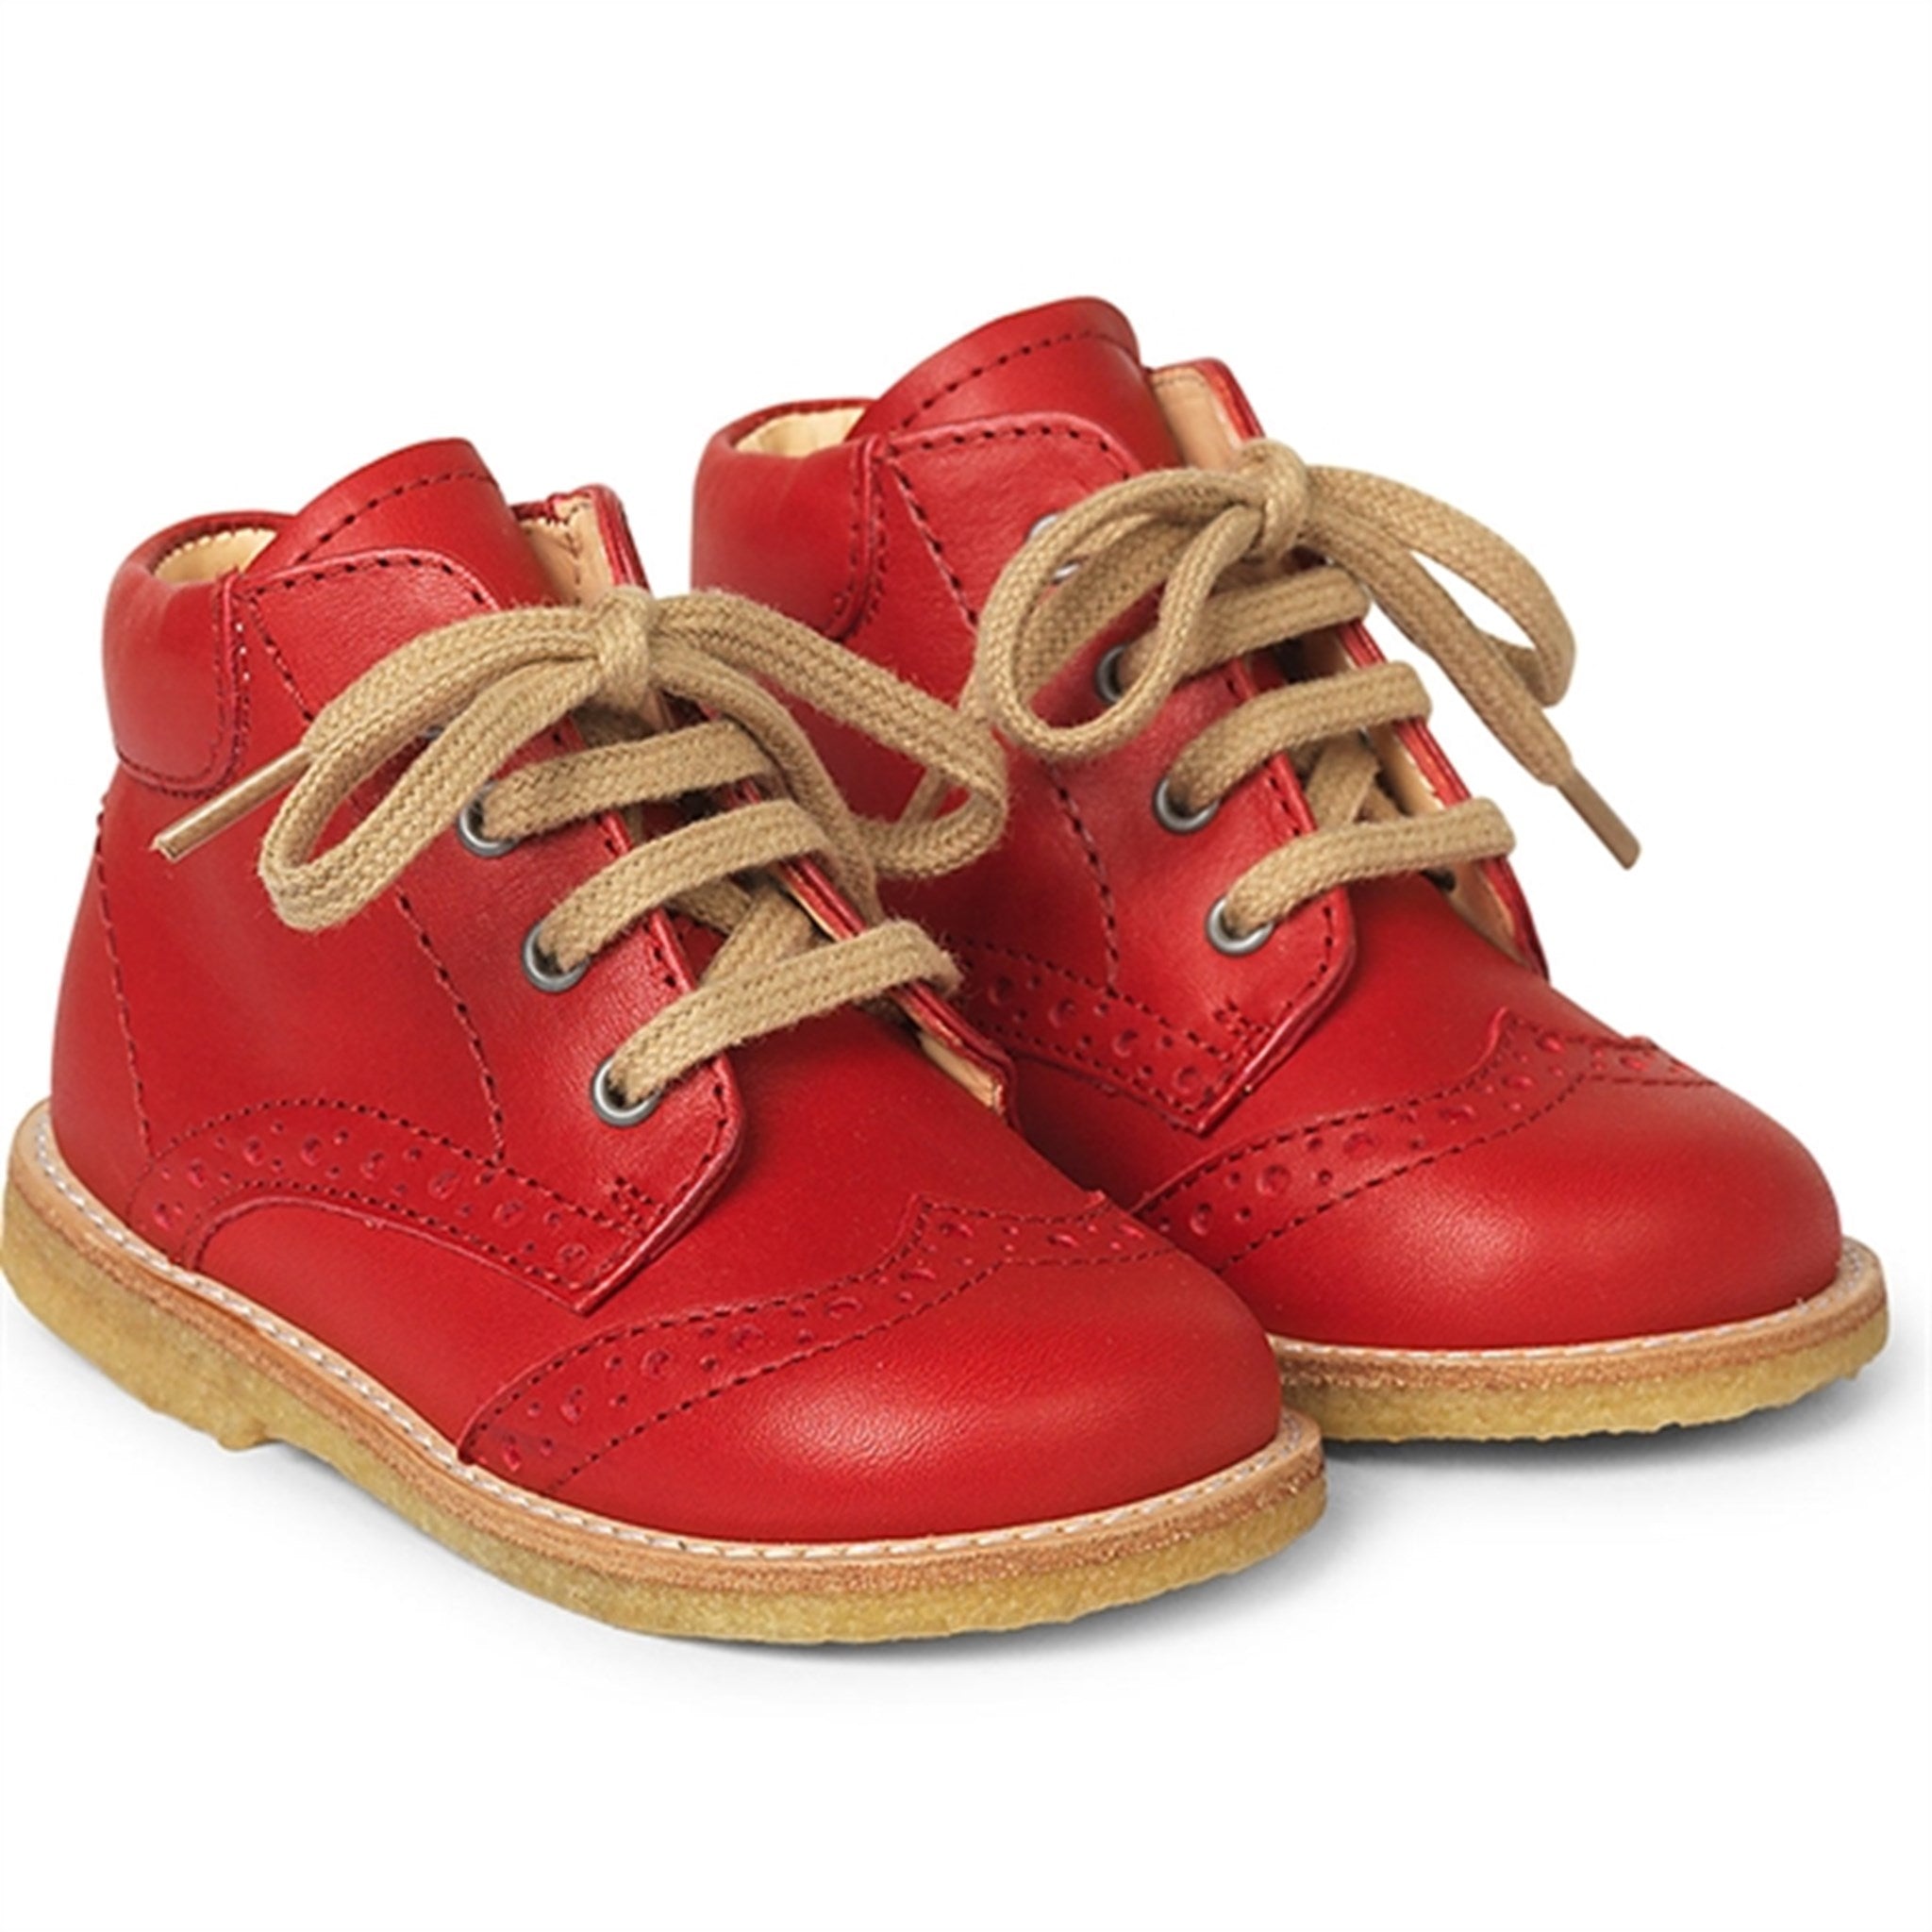 Angulus Beginner Shoes w. Lace Red 2378-101-1412